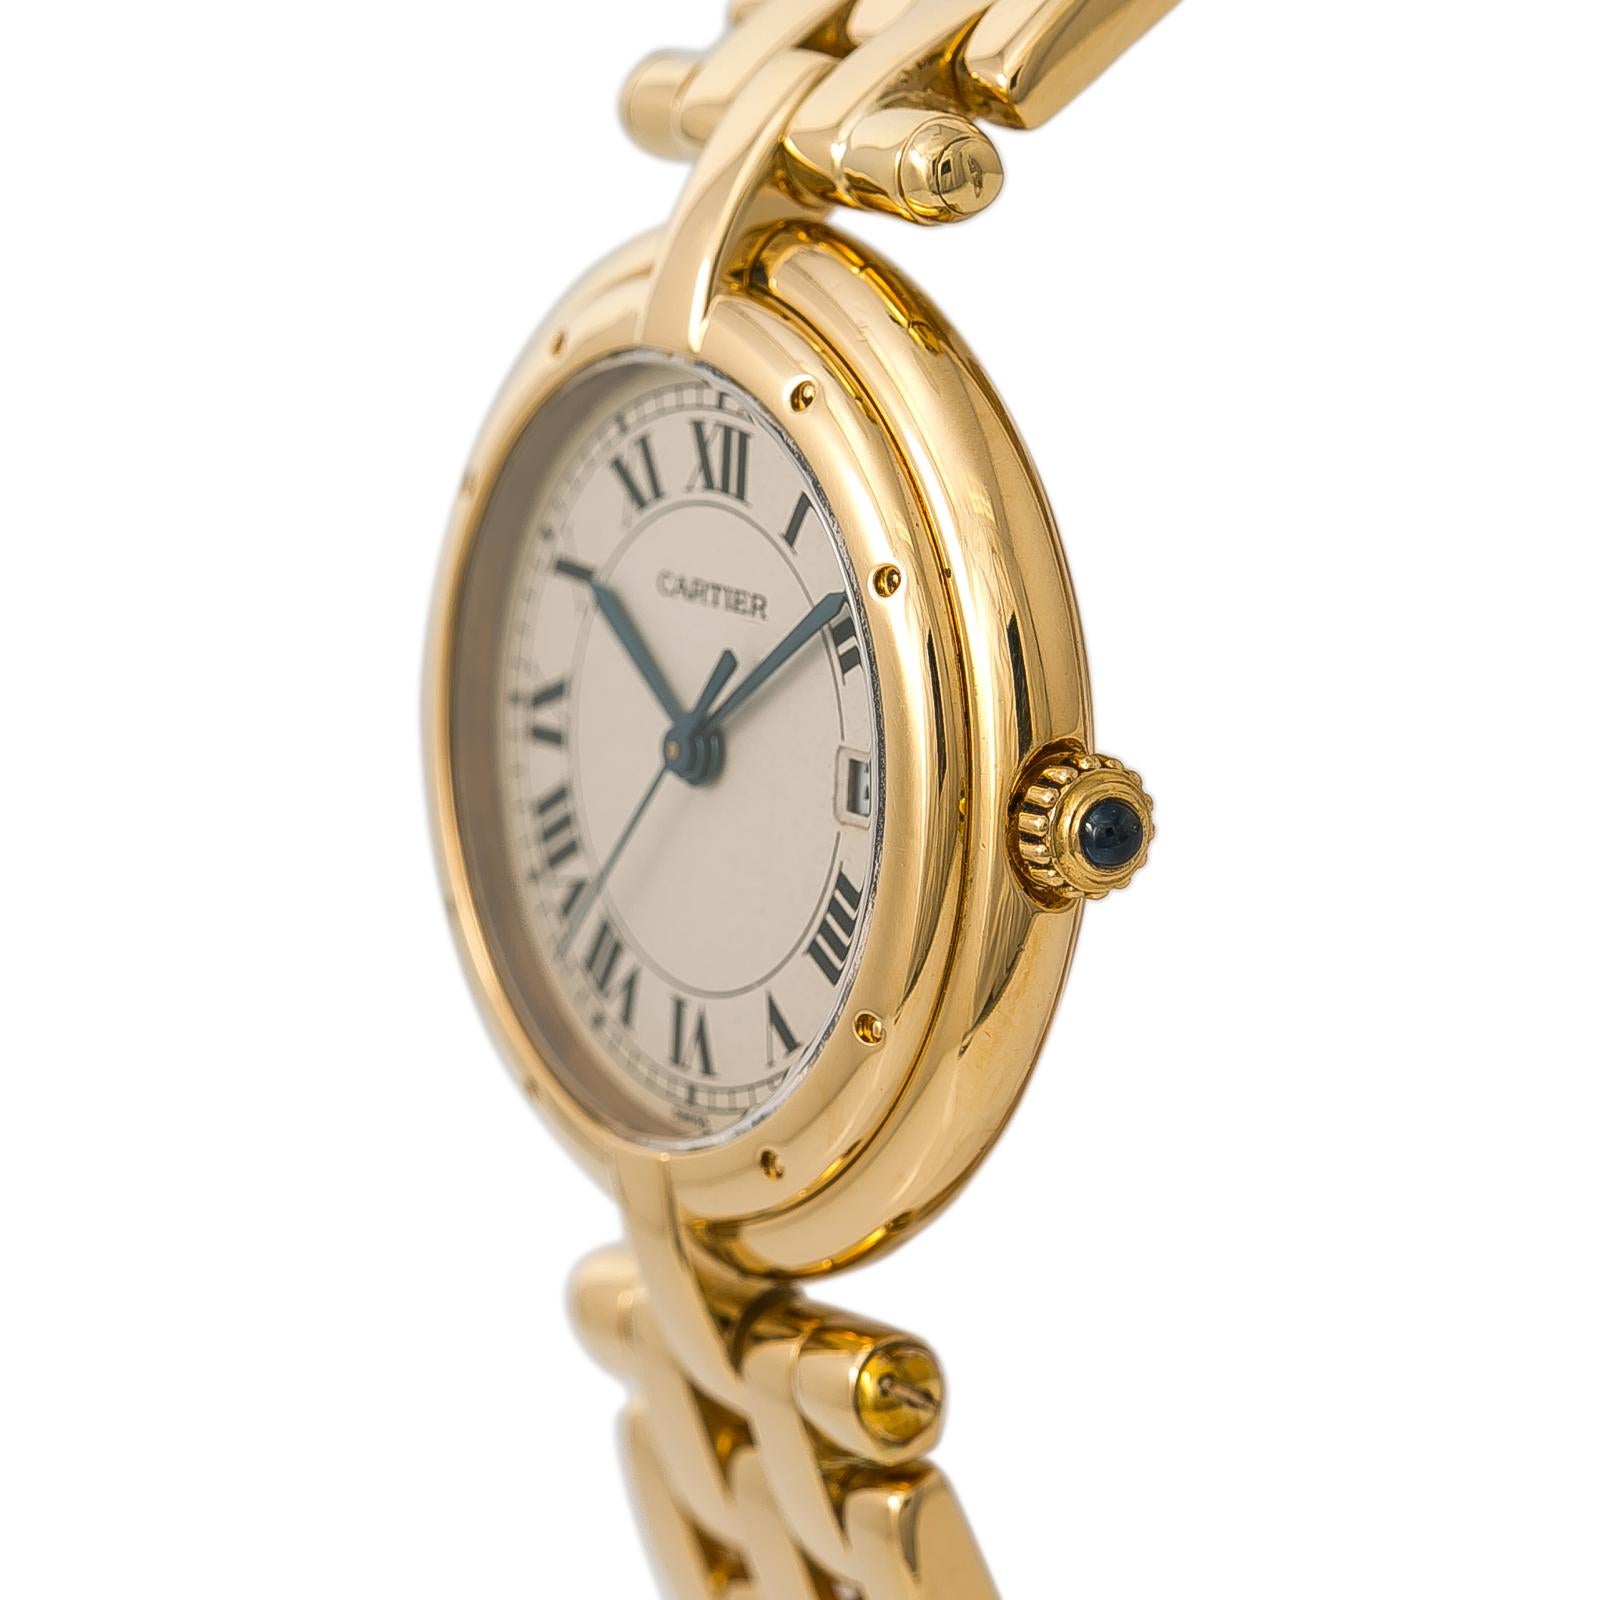 Cartier Panthere Vendome 883964 Womens Quartz Watch 18K Yellow Gold In Good Condition For Sale In Miami, FL